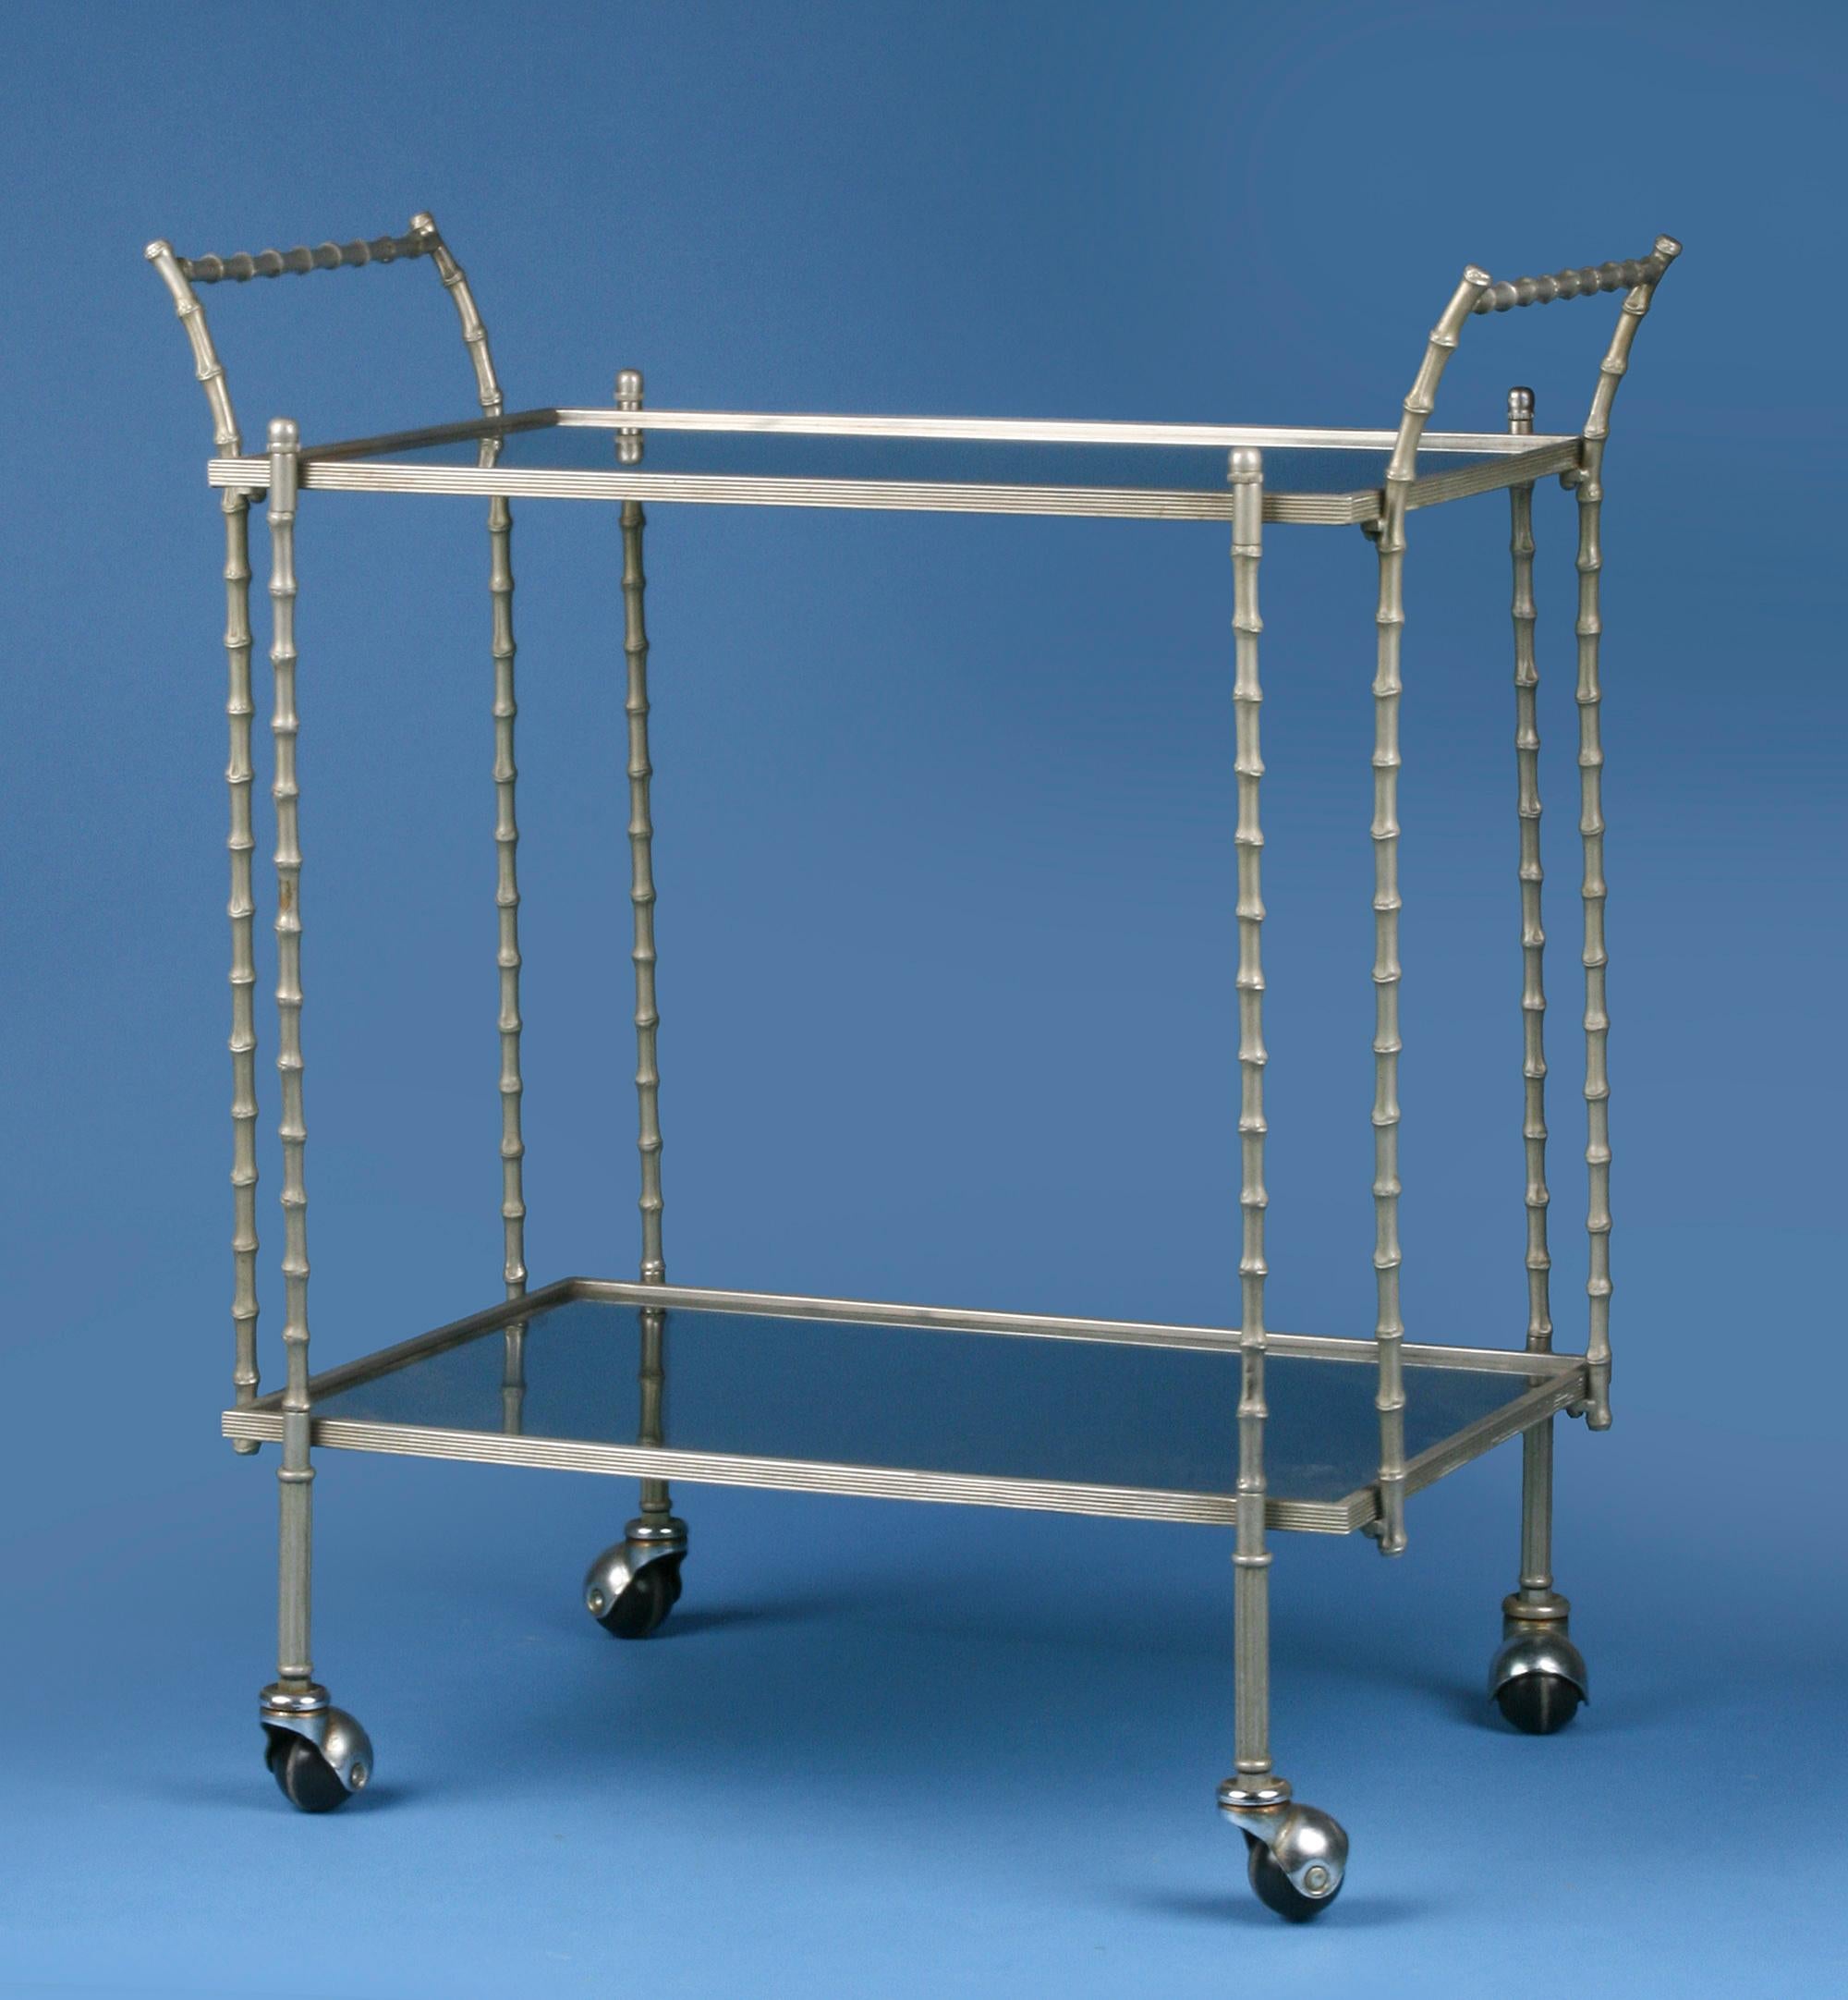 A two tiered bar cart / tea trolley by Maison Baguès Paris. Stylish and elegant. The faux bamboo frame is made of nickel-plated bronze. Inside two brown smoked glasses shelfs. The cart is easy to roll. The wheels function well.
Maison Baguès was